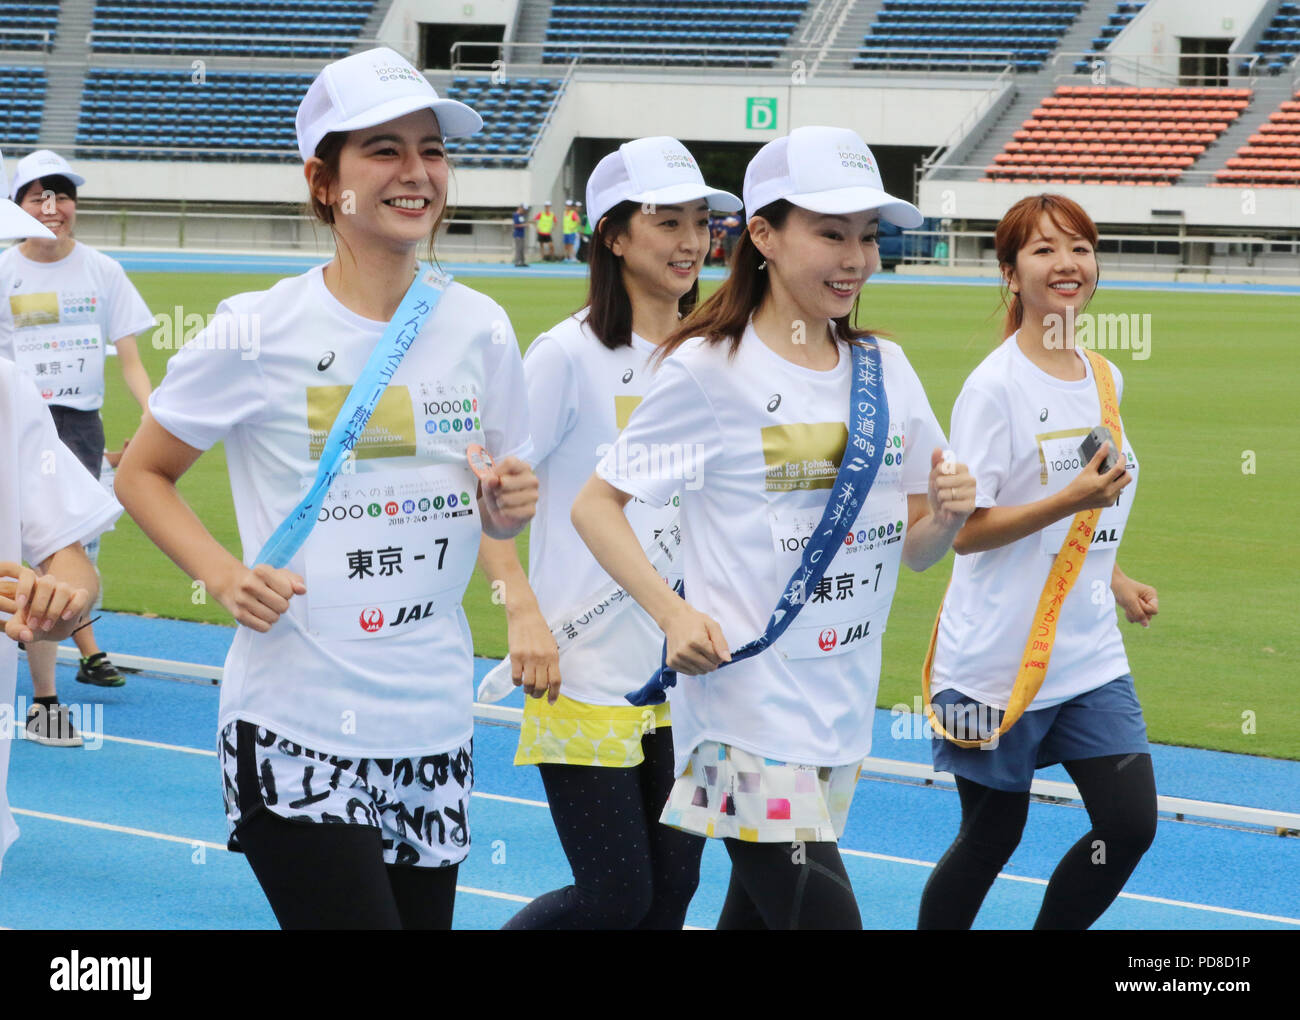 Tokyo, Japan. 7th Aug, 2018. (R-L) Japanese singer Dream Aya, marathon runner Masako Chiba, Barcelona Olympics swimming gold medalist Kyoko Iwasaki and TV personality Suzanne are on the way to finish line for the '1,000km relay to Tokyo' at the Komazawa stadium in Tokyo on Tuesday, August 7, 2018. Some 1,600 runners participated the marathon relay from Aomori to Tokyo for the commemoration of the 3.11 East Japan Great Earthquake. Credit: Yoshio Tsunoda/AFLO/Alamy Live News Stock Photo